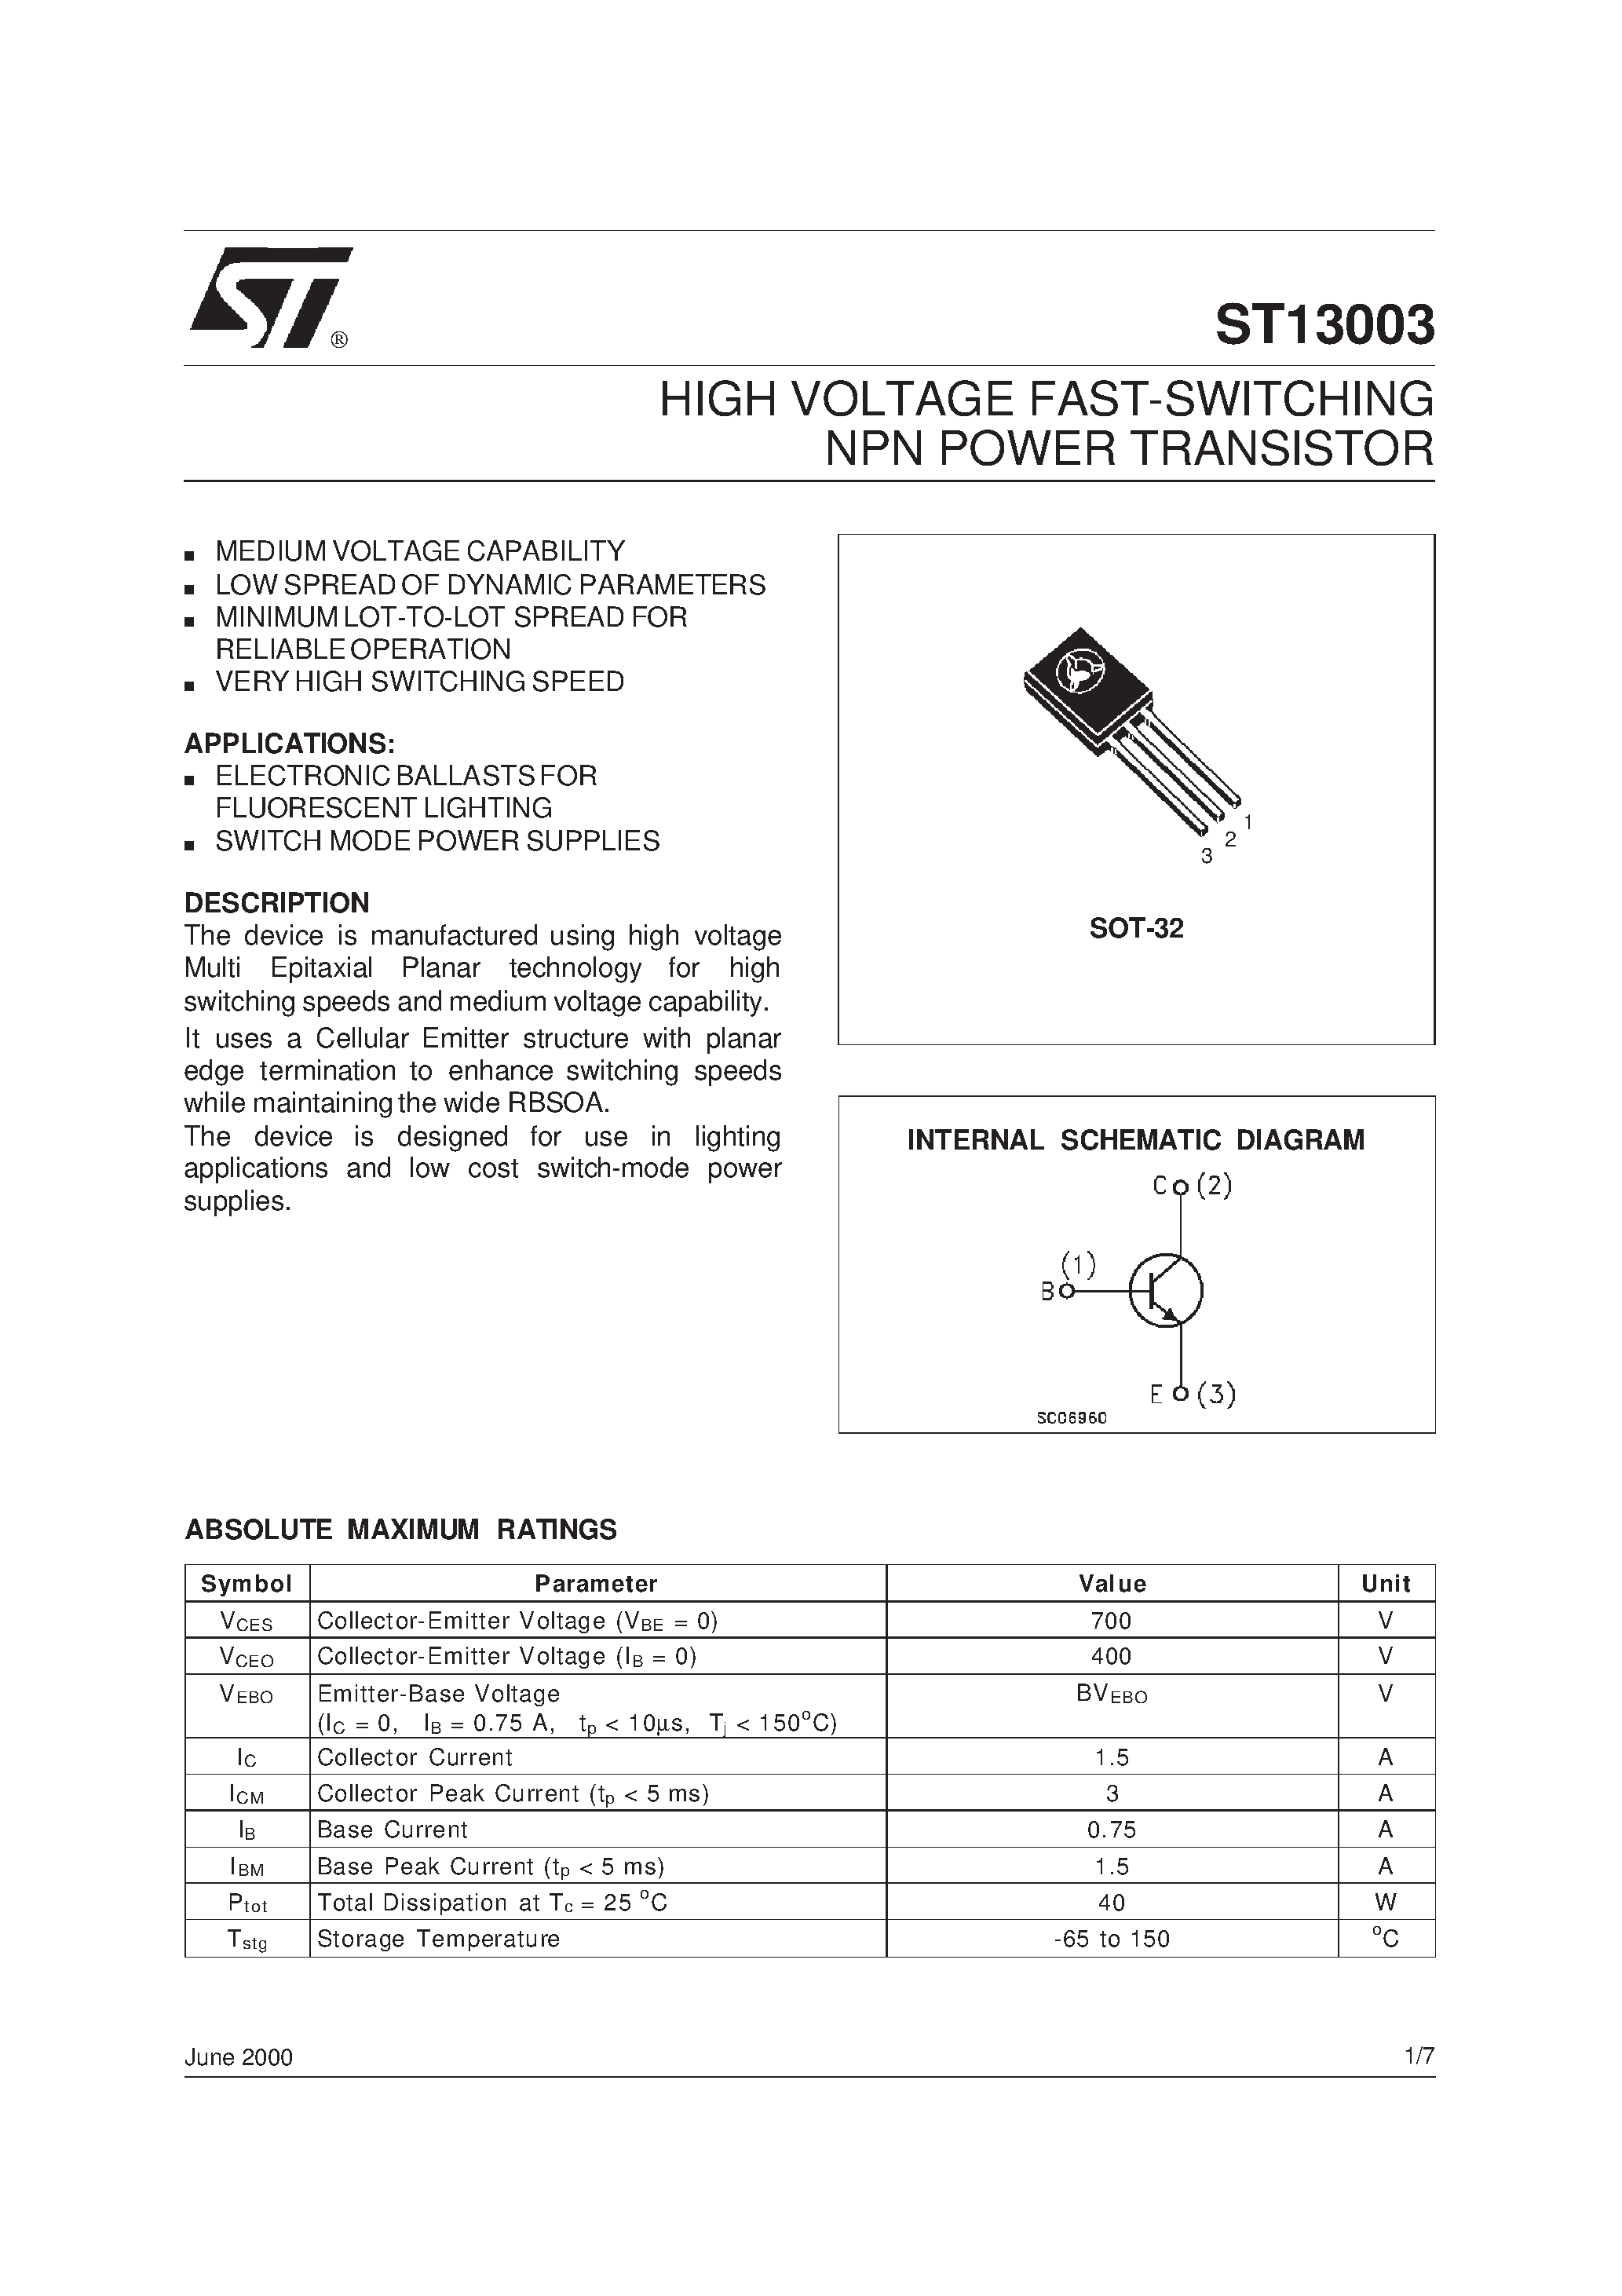 Даташит ST13003 - HIGH VOLTAGE FAST-SWITCHING NPN POWER TRANSISTOR страница 1